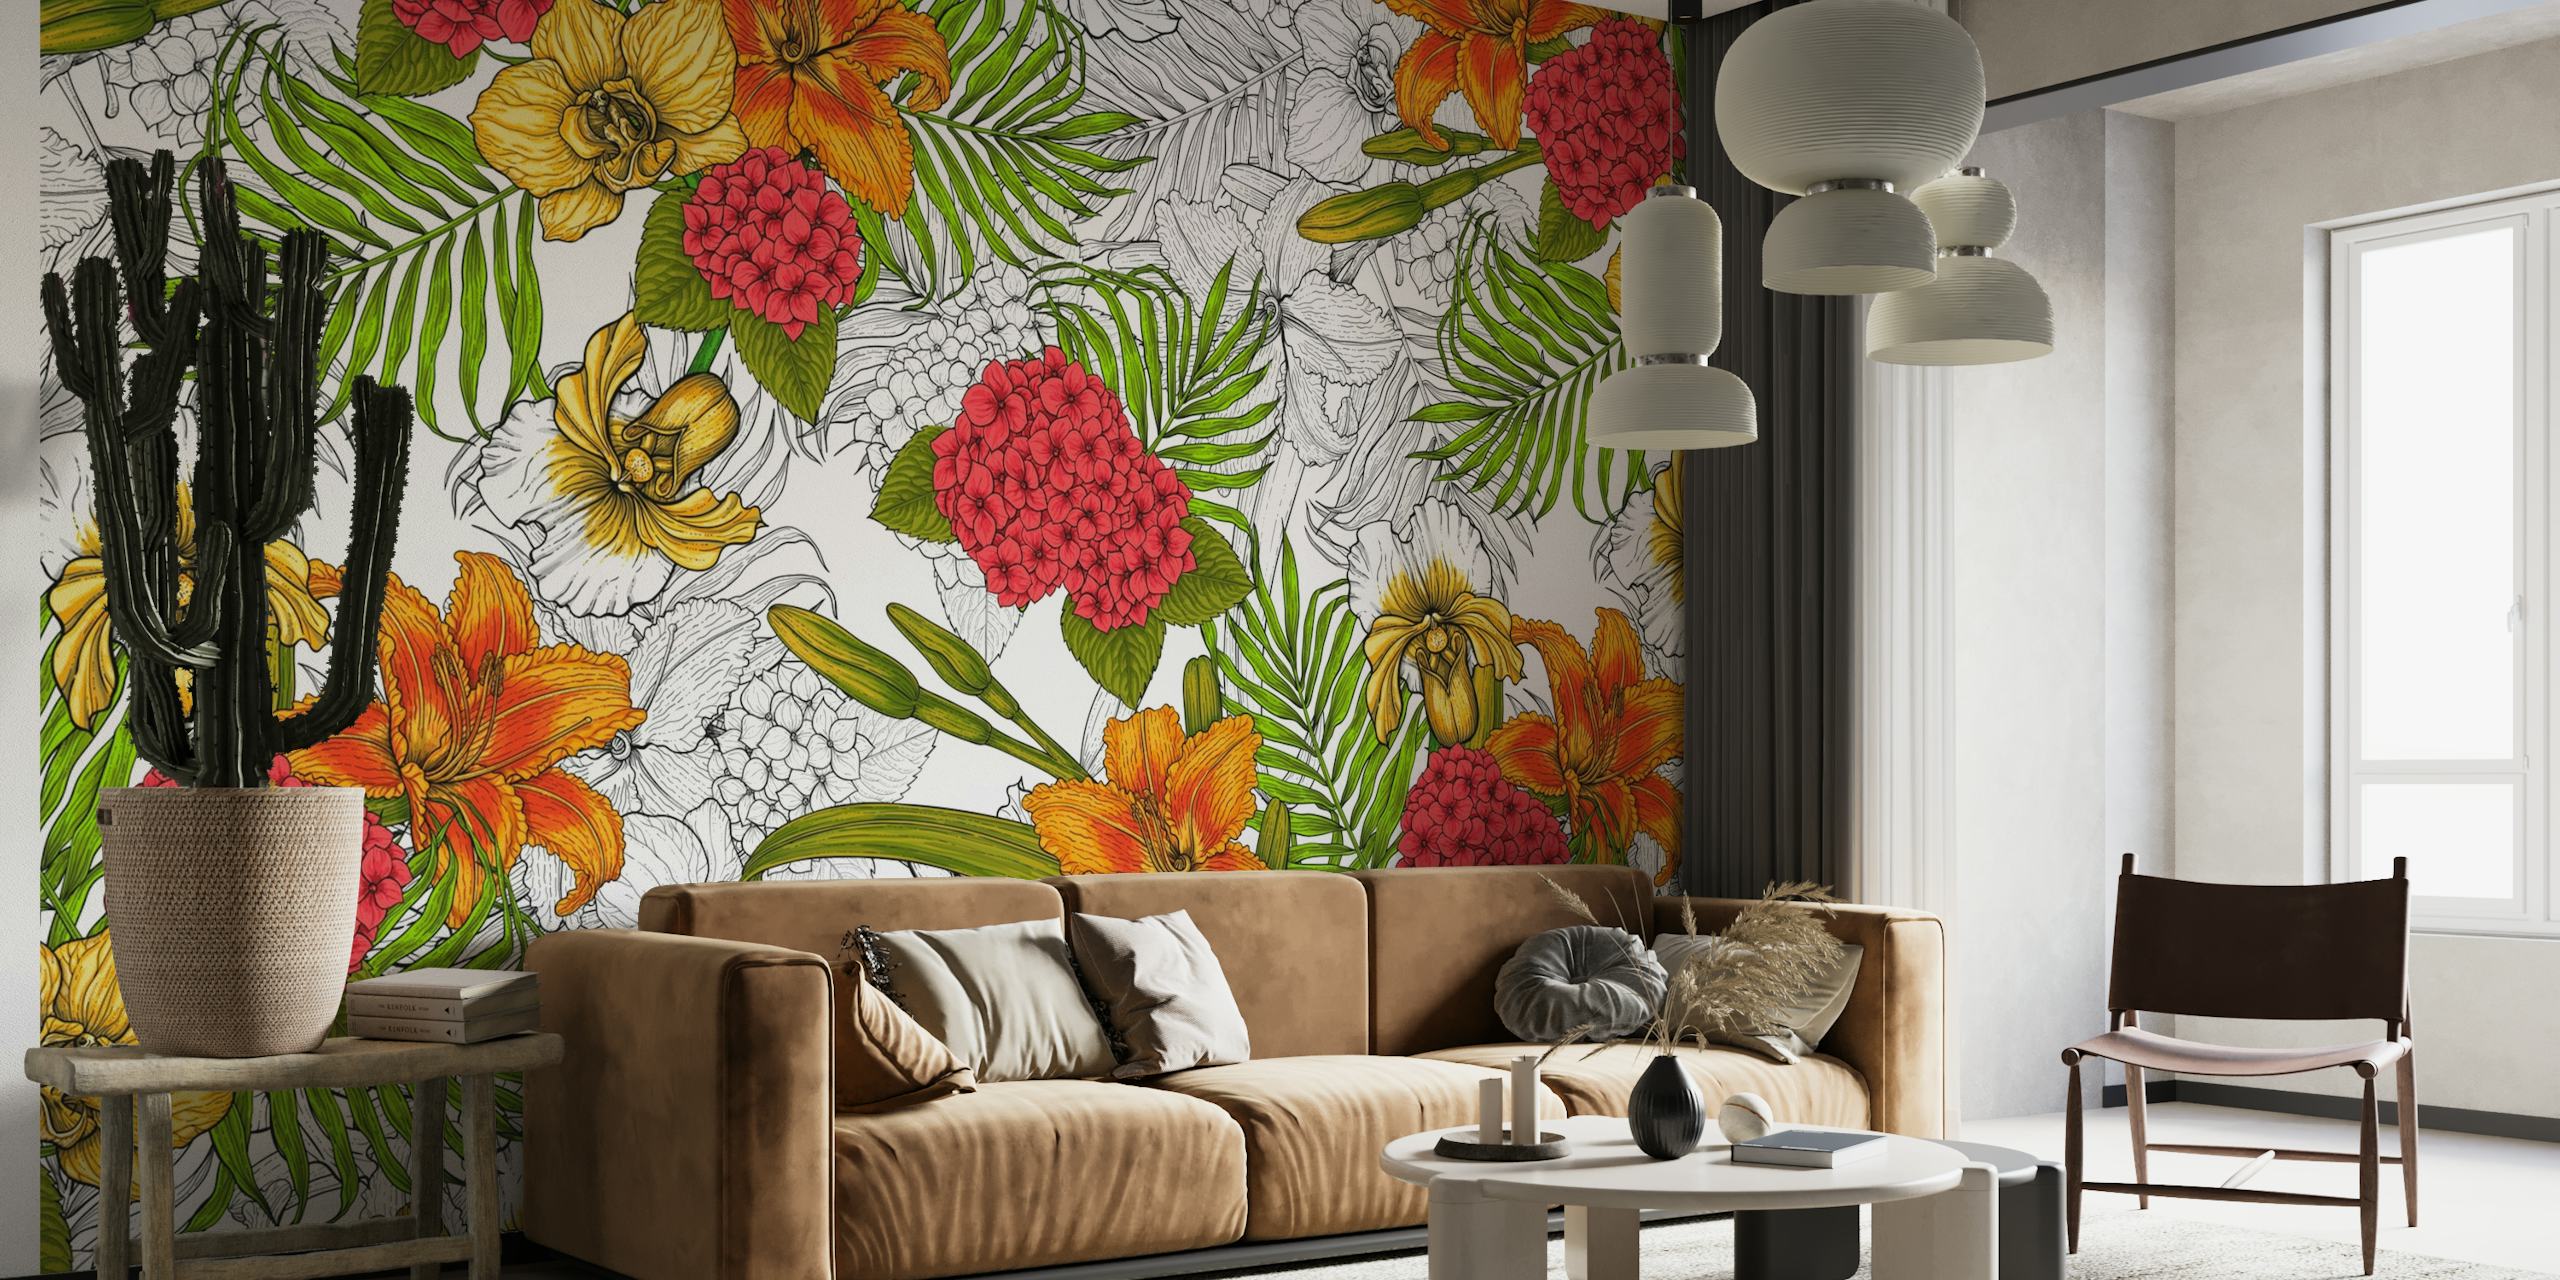 Vibrant tropical flowers and greenery wall mural